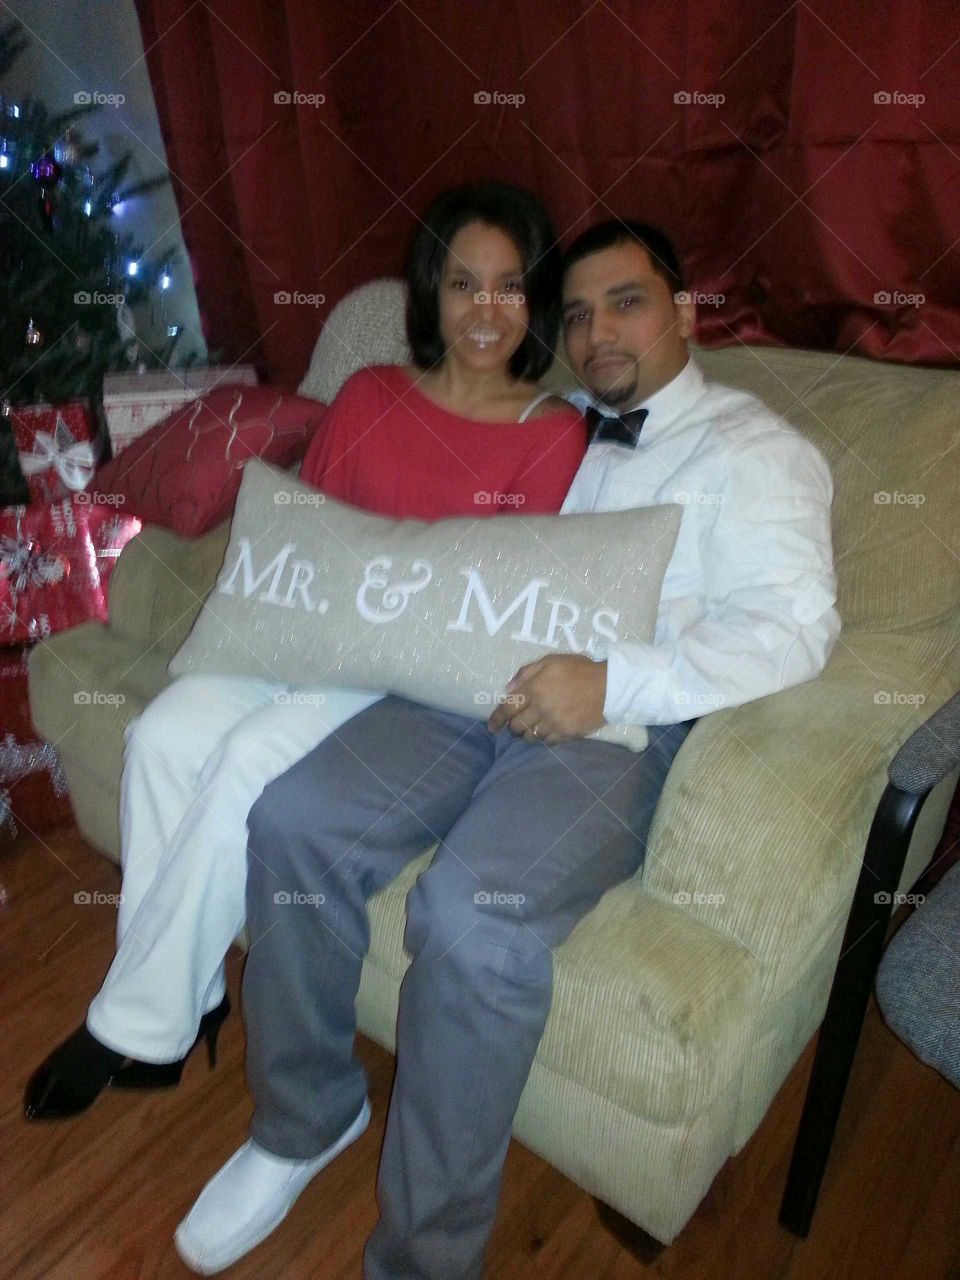 Mr. and Mrs. Love